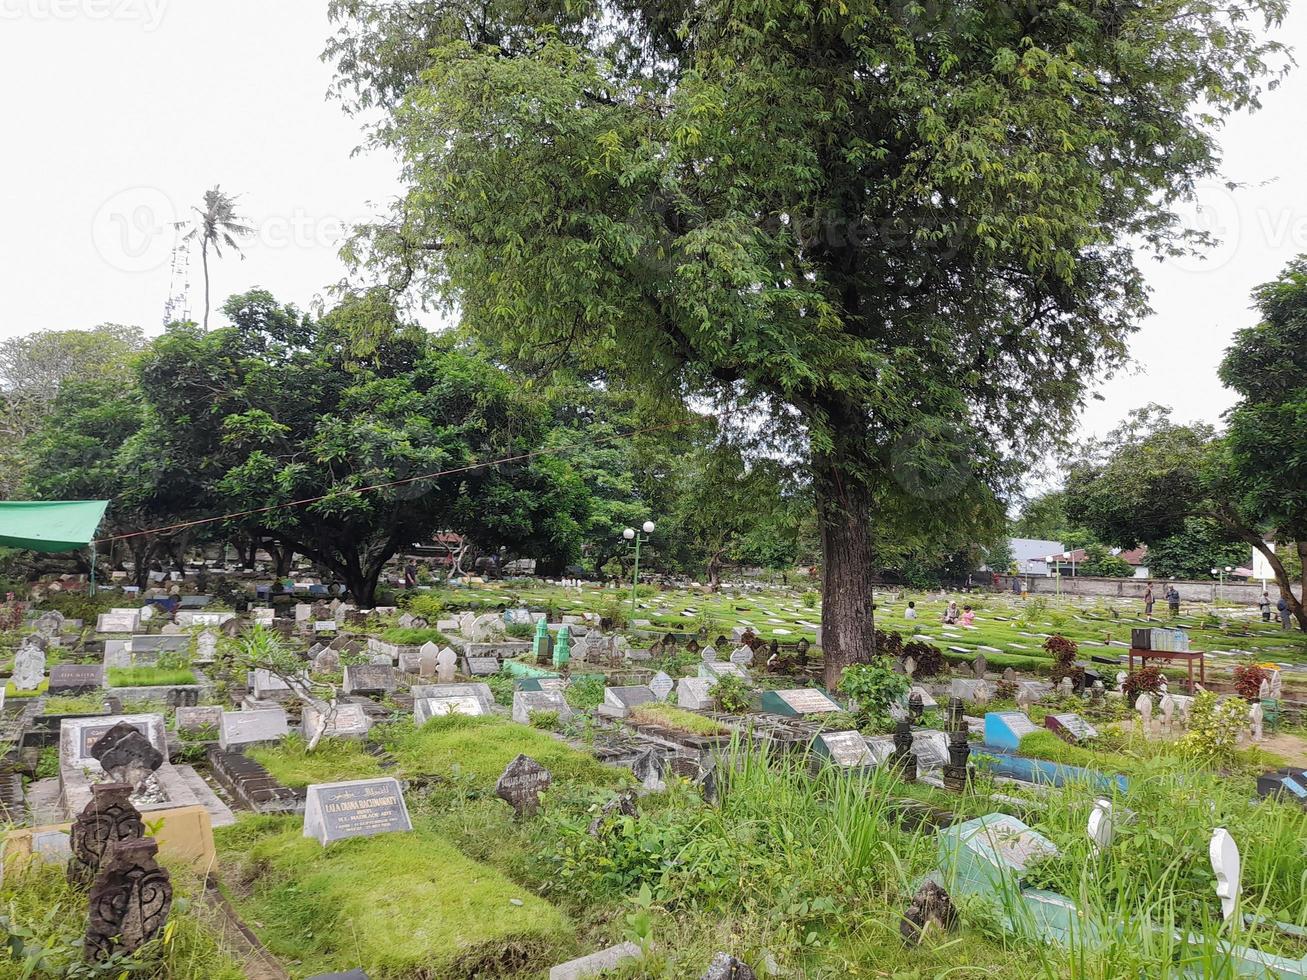 Cemetery for Muslims in the city of Mataram, Lombok island, Indonesia photo